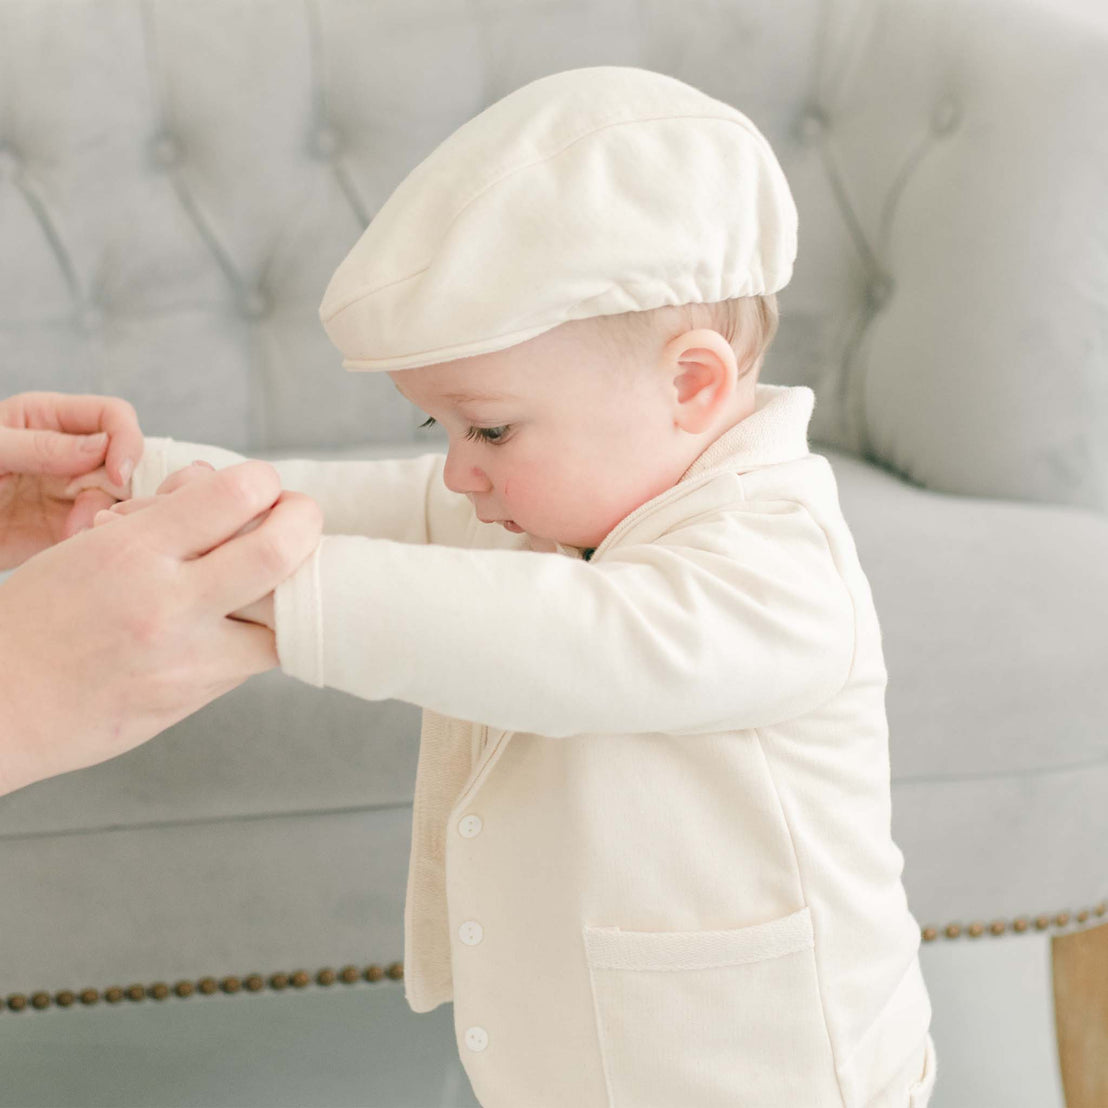 Closer detail of baby boy being guided by his mother. He is wearing the Ezra Tan 4-Piece Suit with matching newsboy cap